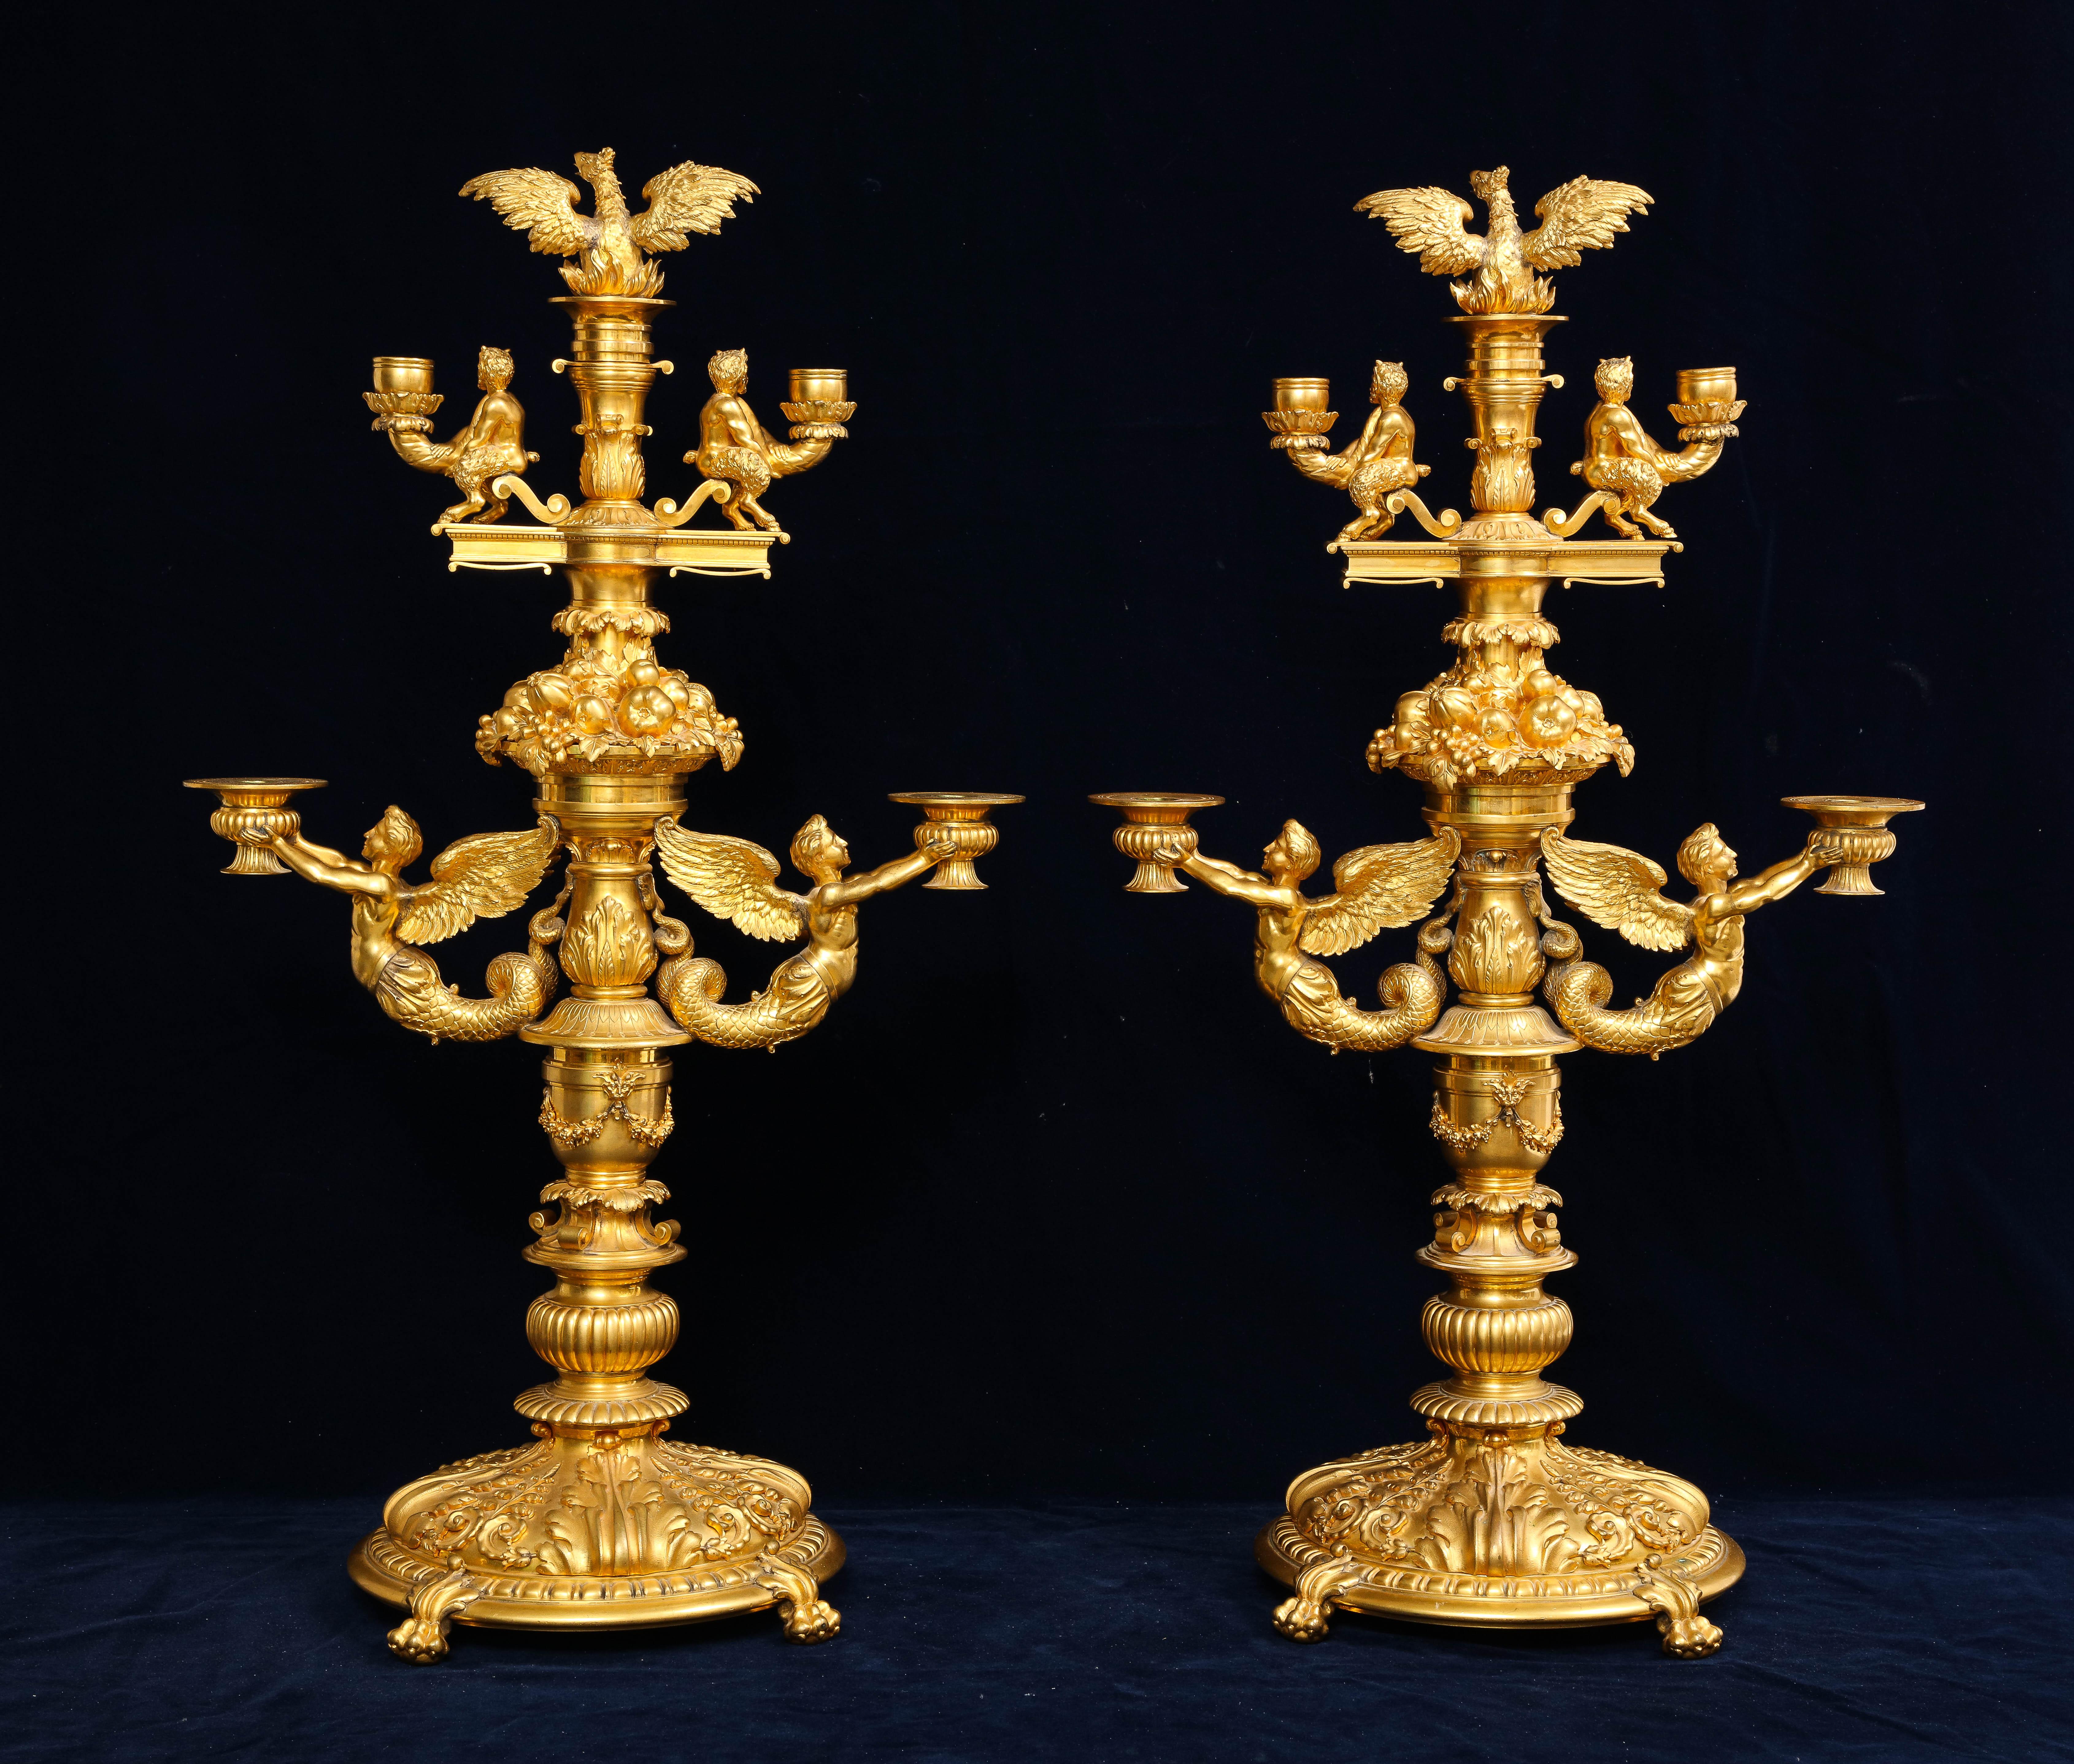 A Marvelous Pair of 19th century French Ormolu Four-Arm Candelabras, Signed Paul Canaux. Paul Canaux was an incredible jeweler and silversmith, and would produce his pieces in 30 rue des Francs-Bourgeois in Paris. He originally worked for the great